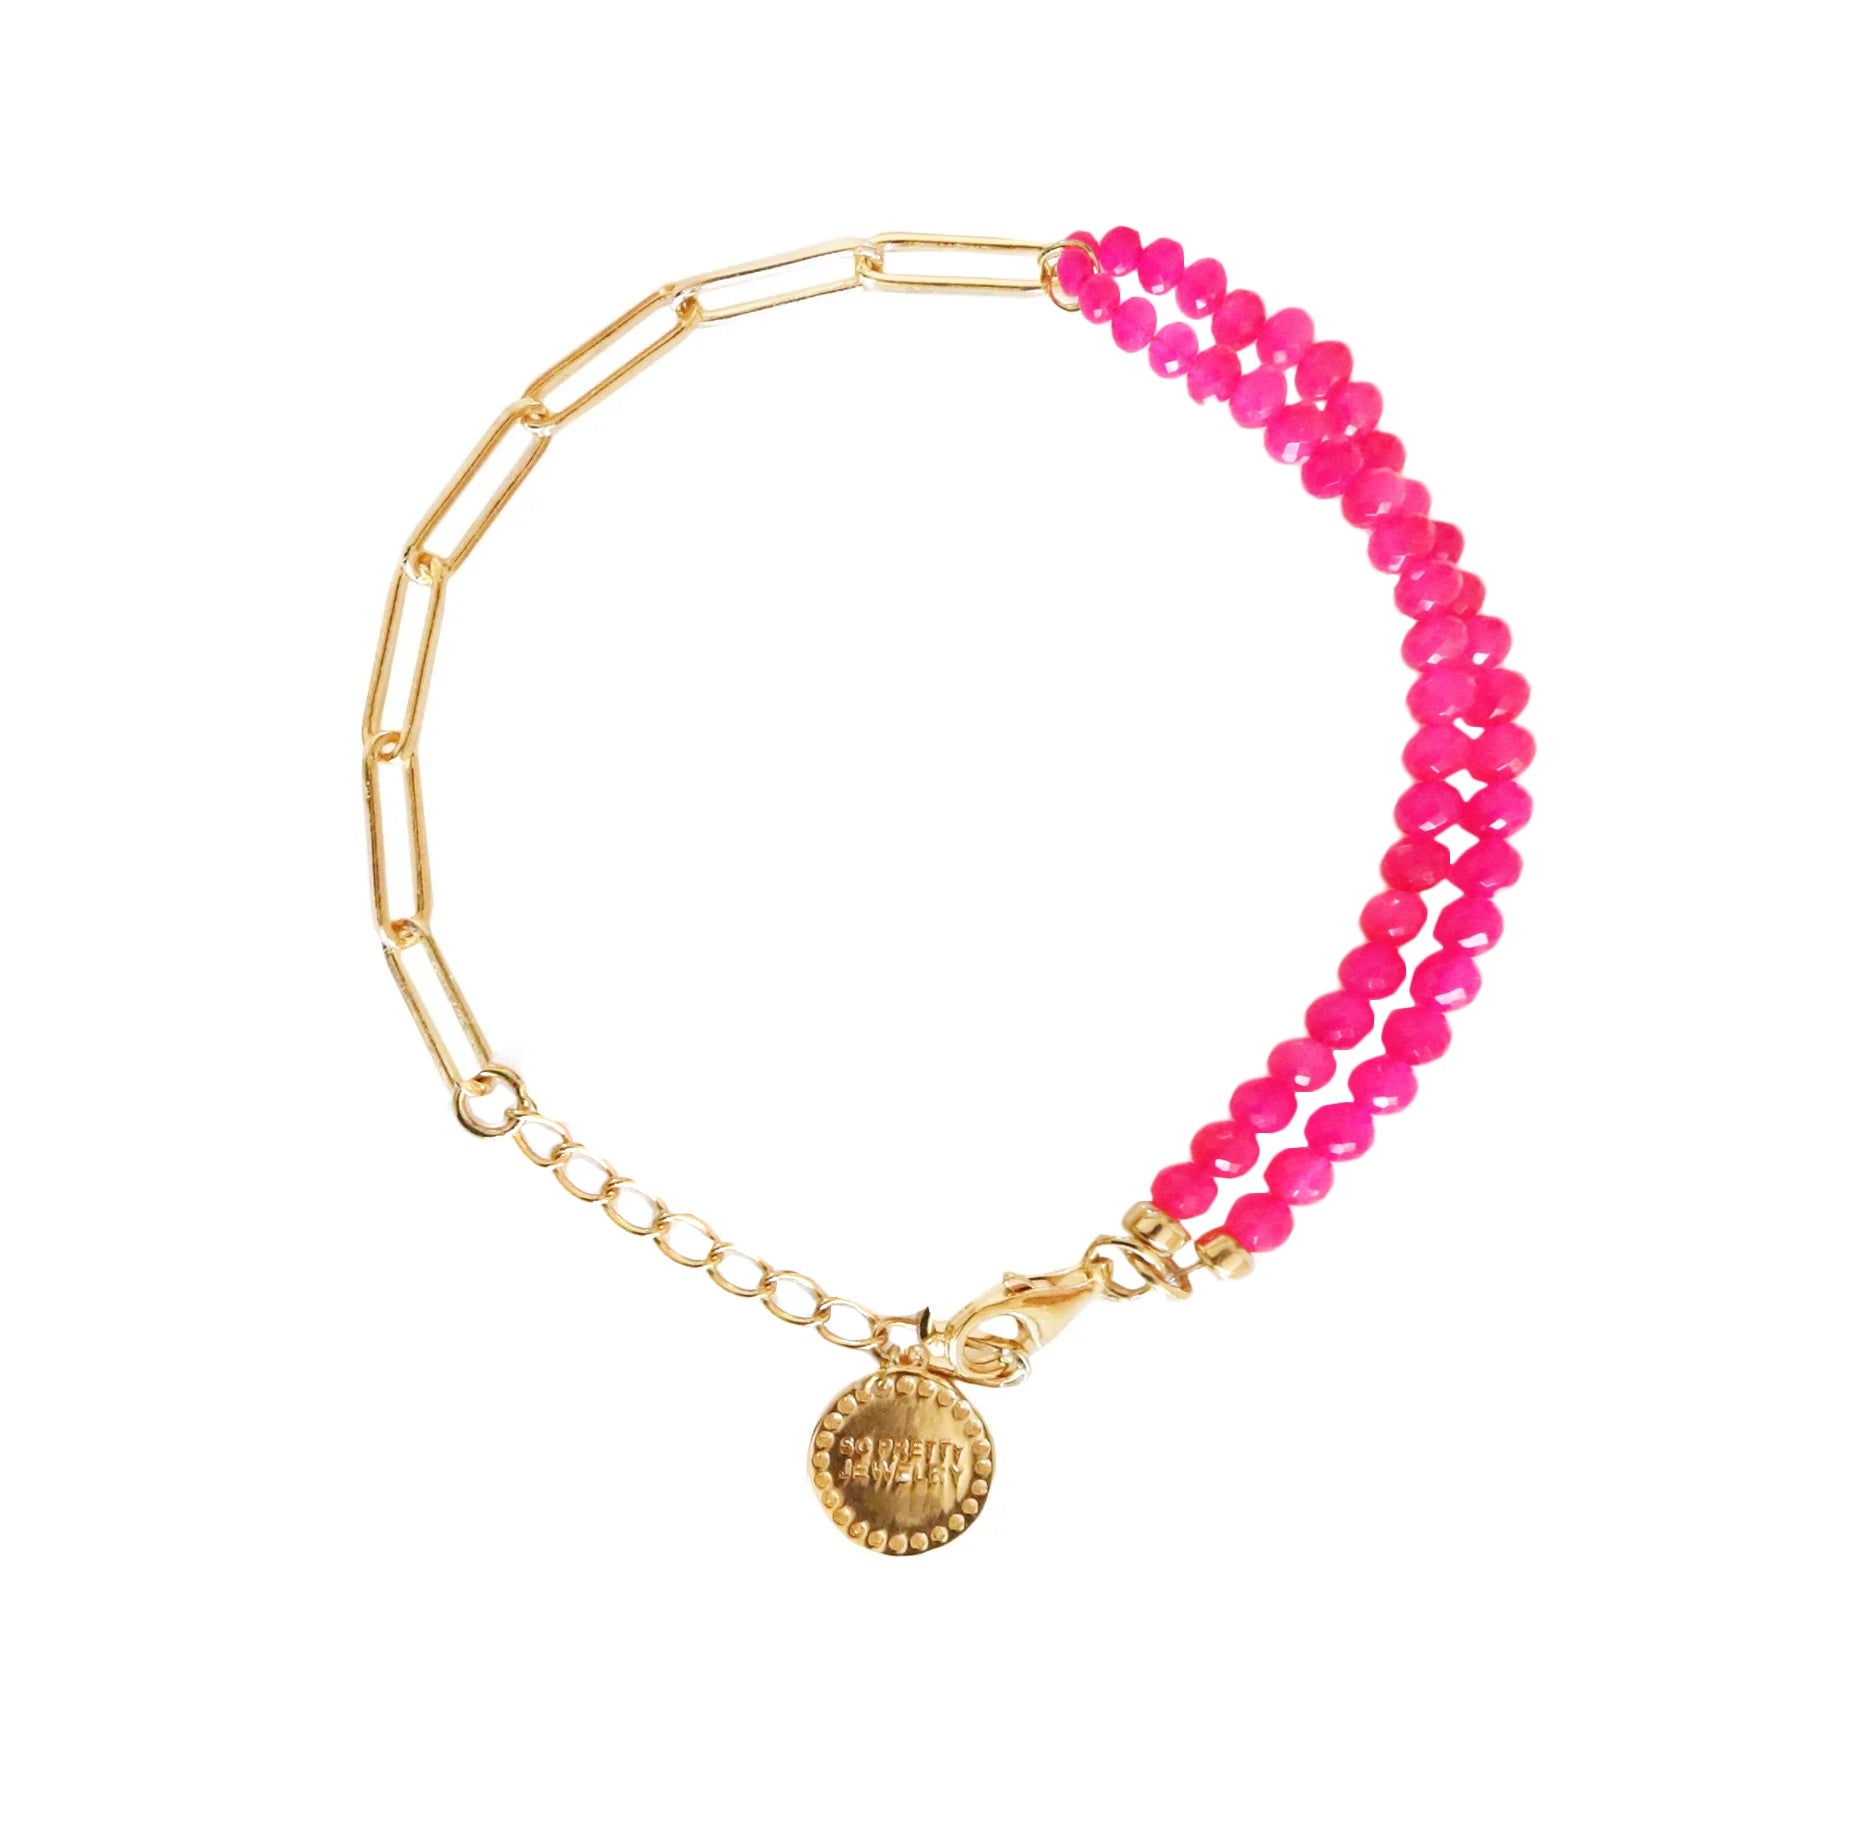 POISE BEADED LINK BRACELET - HOT PINK CHALCEDONY & GOLD 7-8" - SO PRETTY CARA COTTER